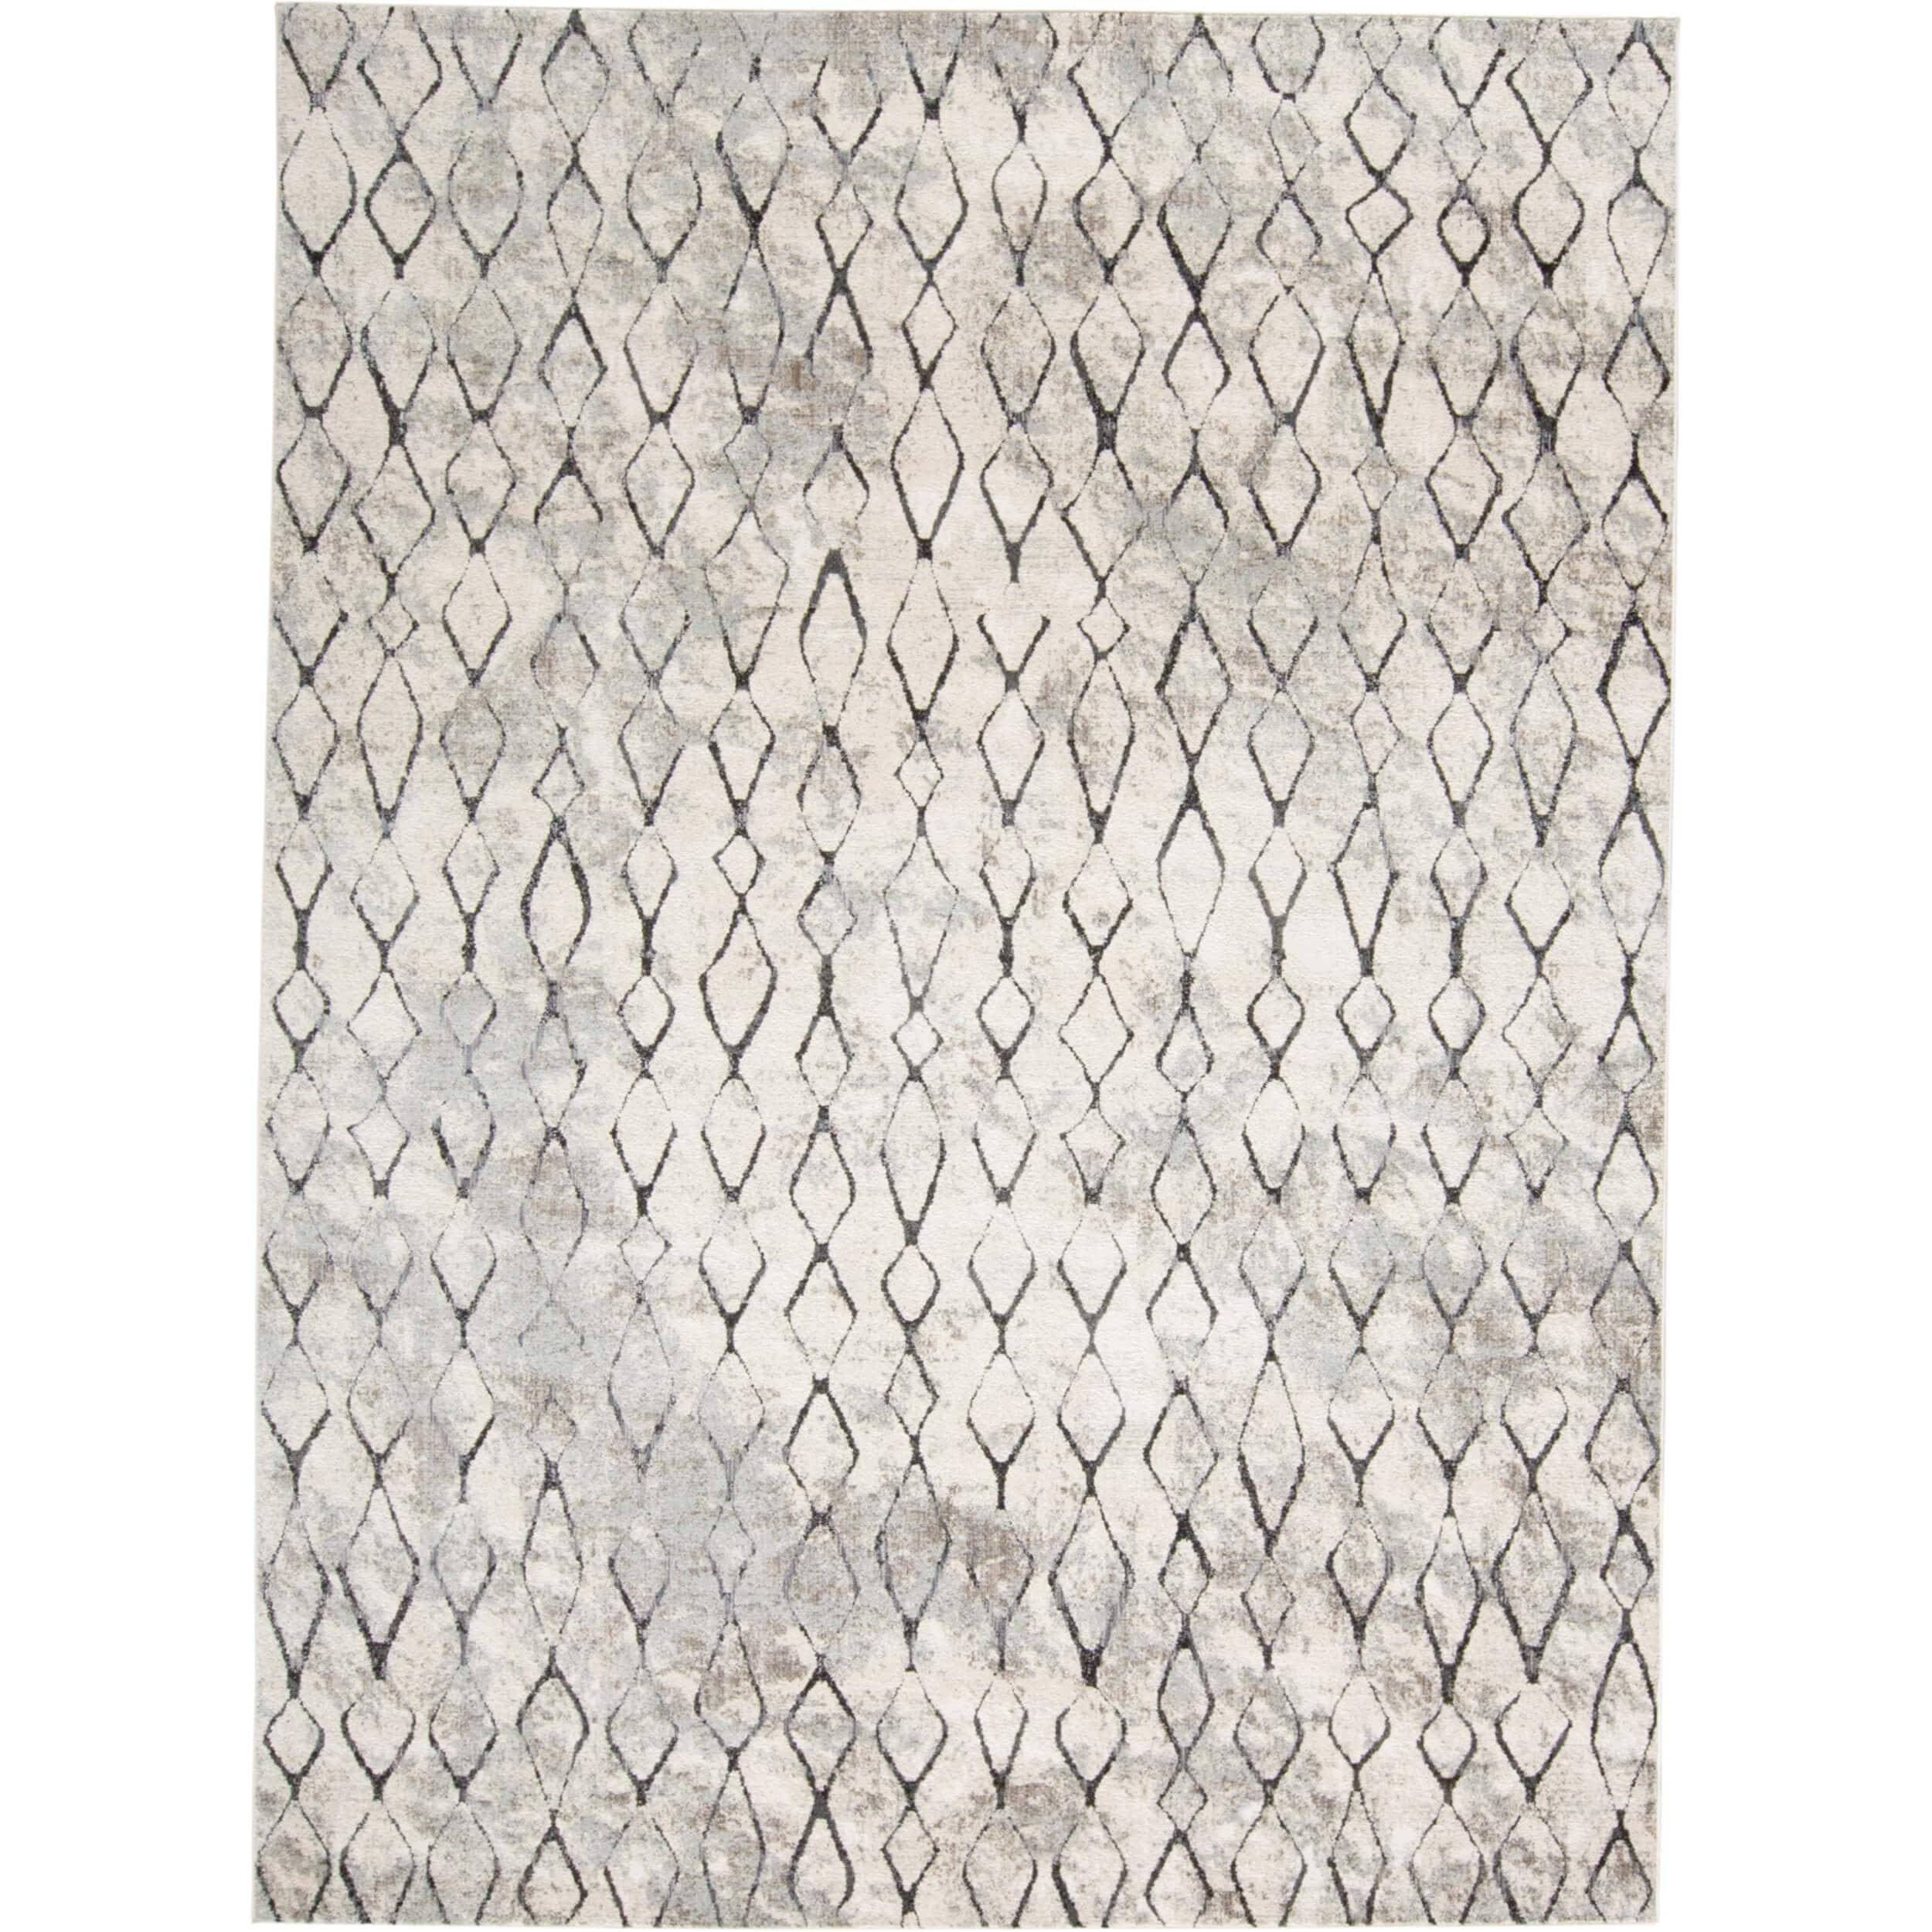 Image of Feizy Rug Kano 3872F, Sand/Charcoal